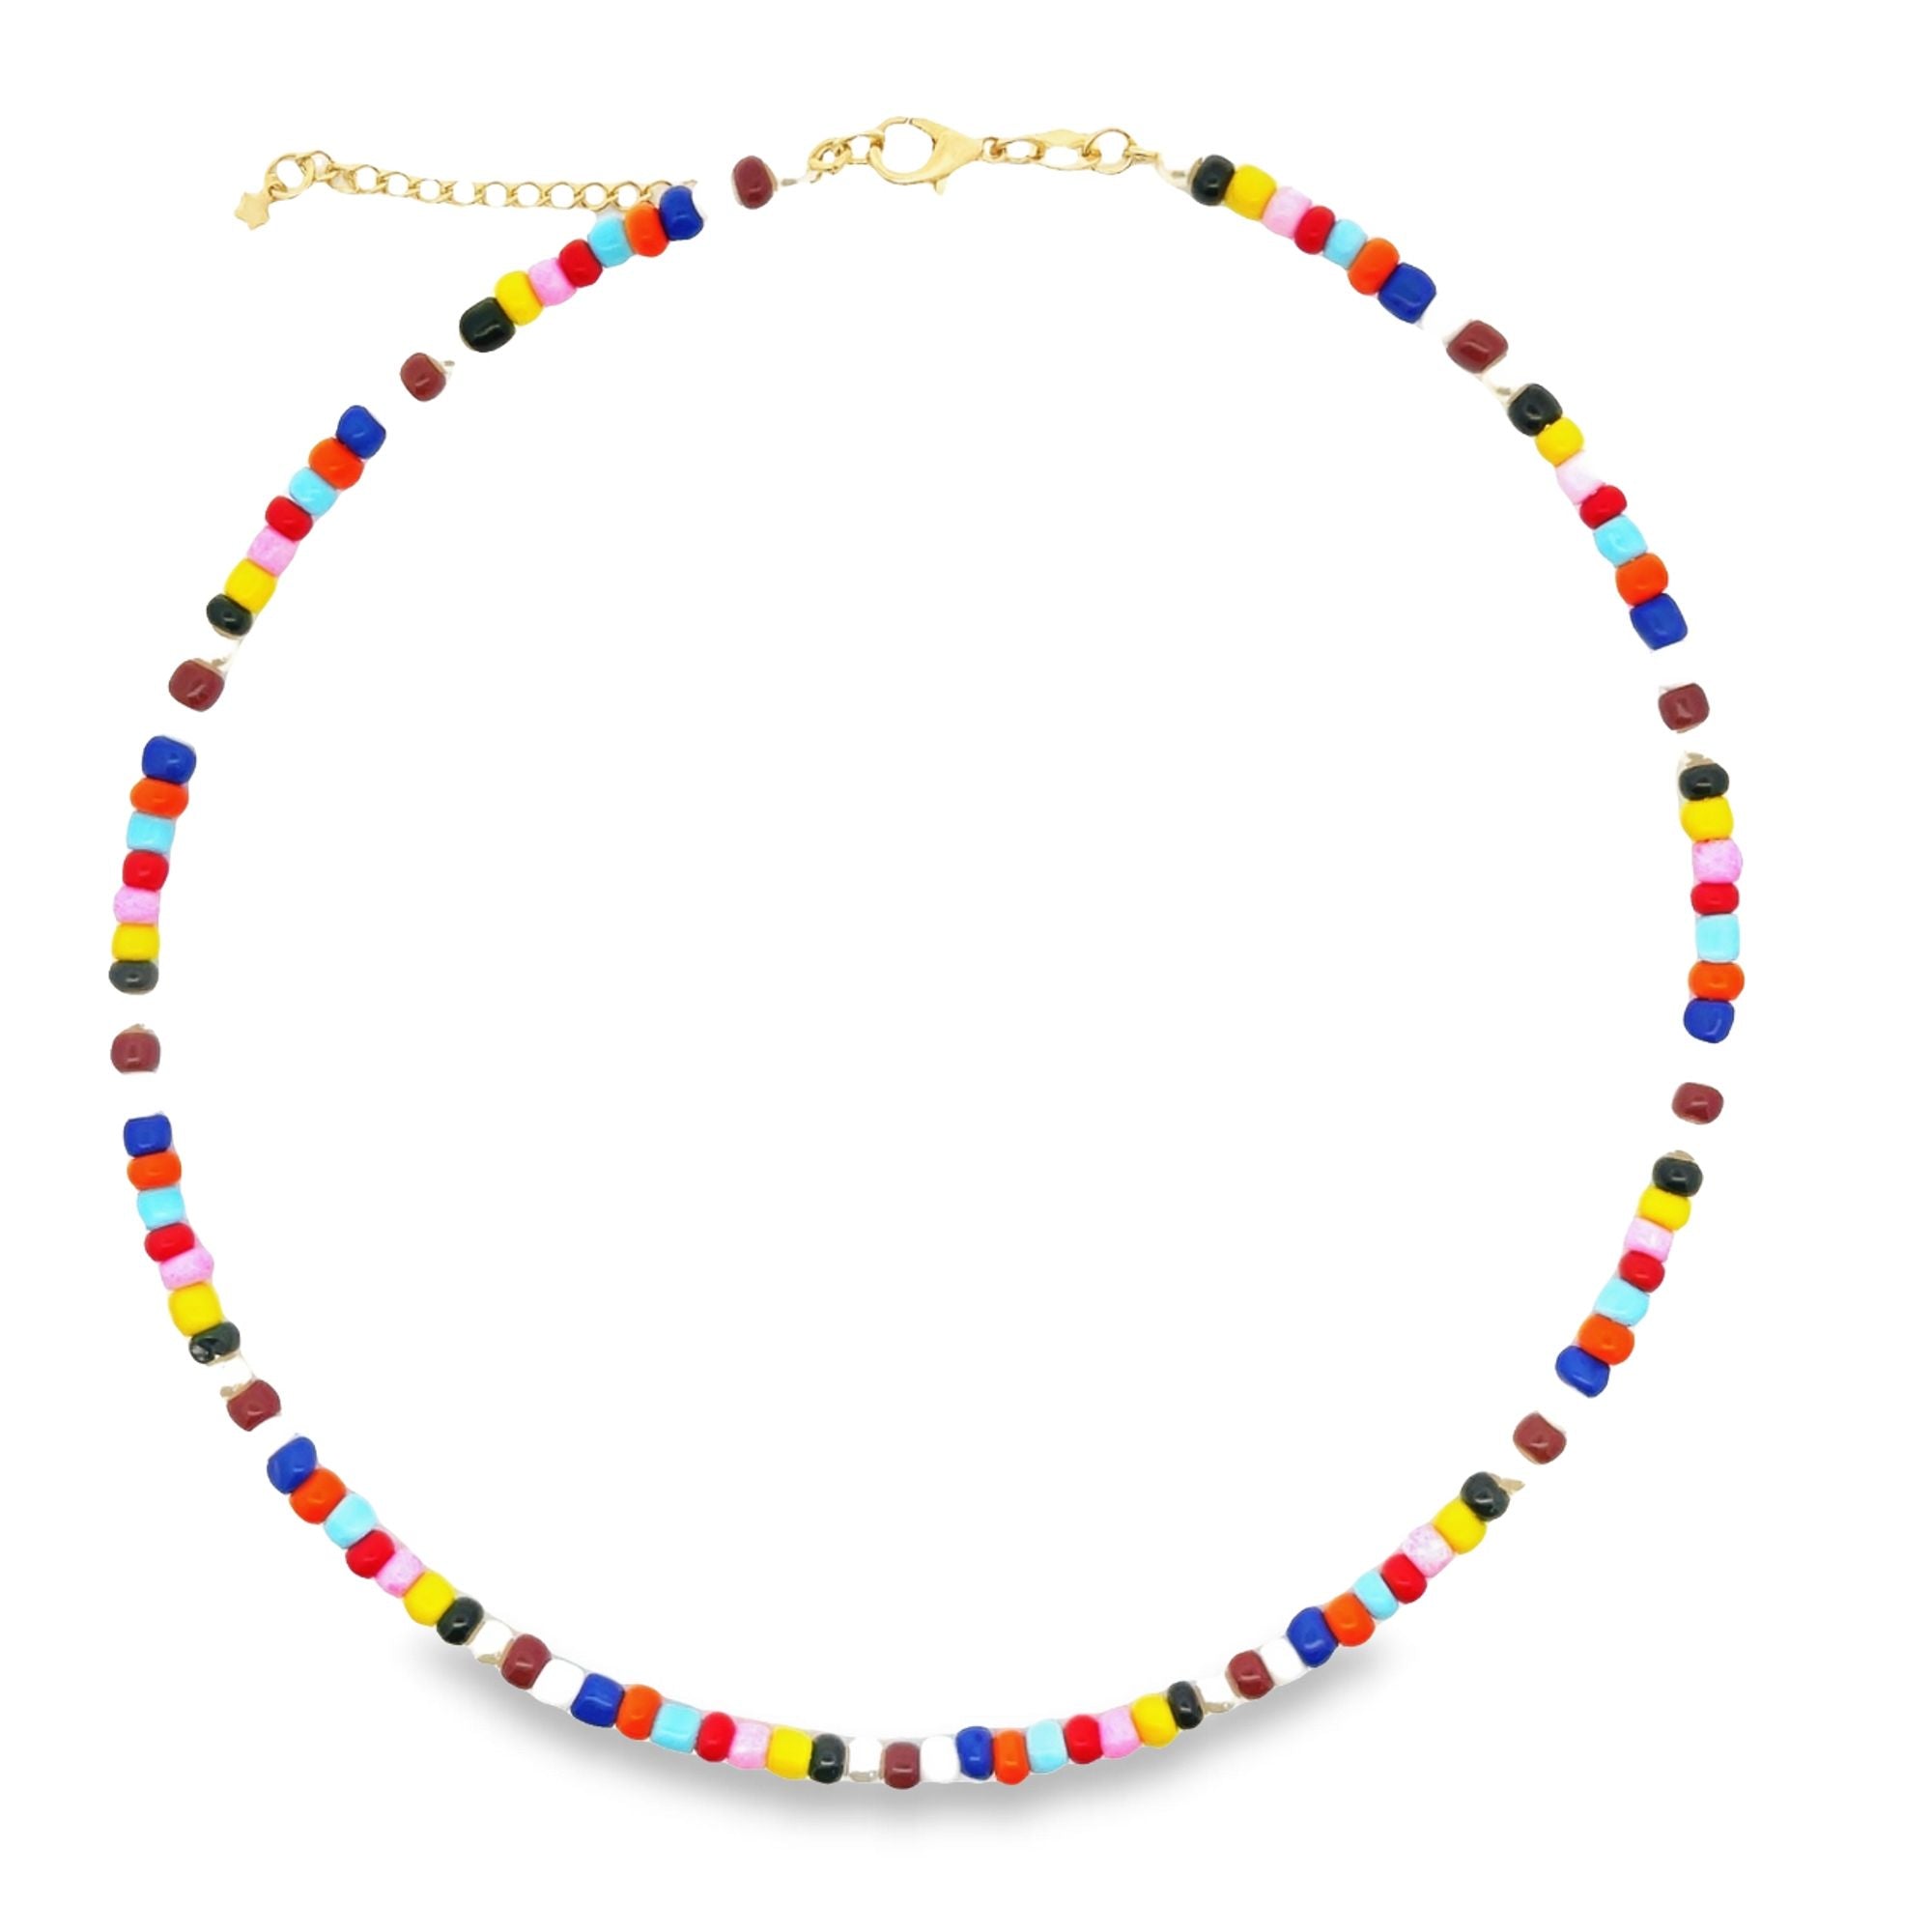 Bead Bracelet With Colorful Beads (H205)(B96A)